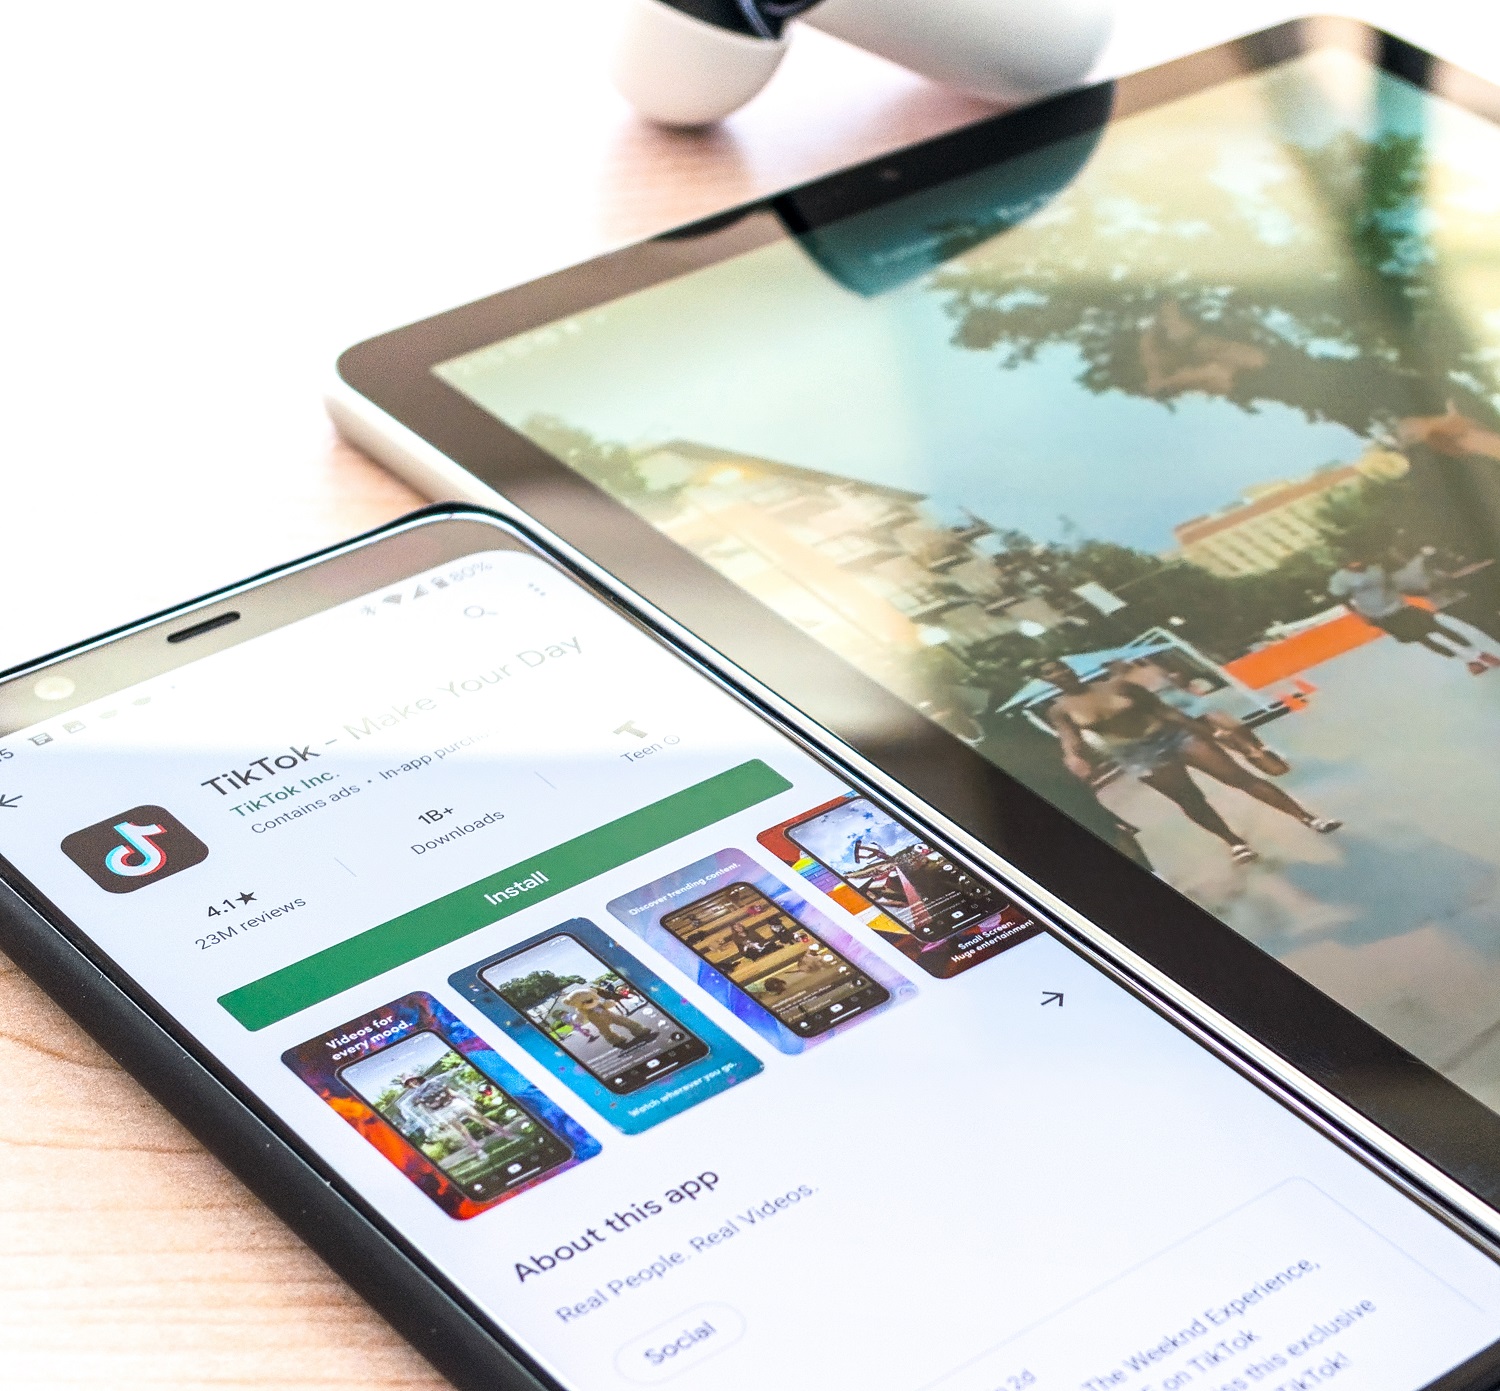 Google Launches Offers Tab on Play Store | Discover Games, Apps, and More Deals